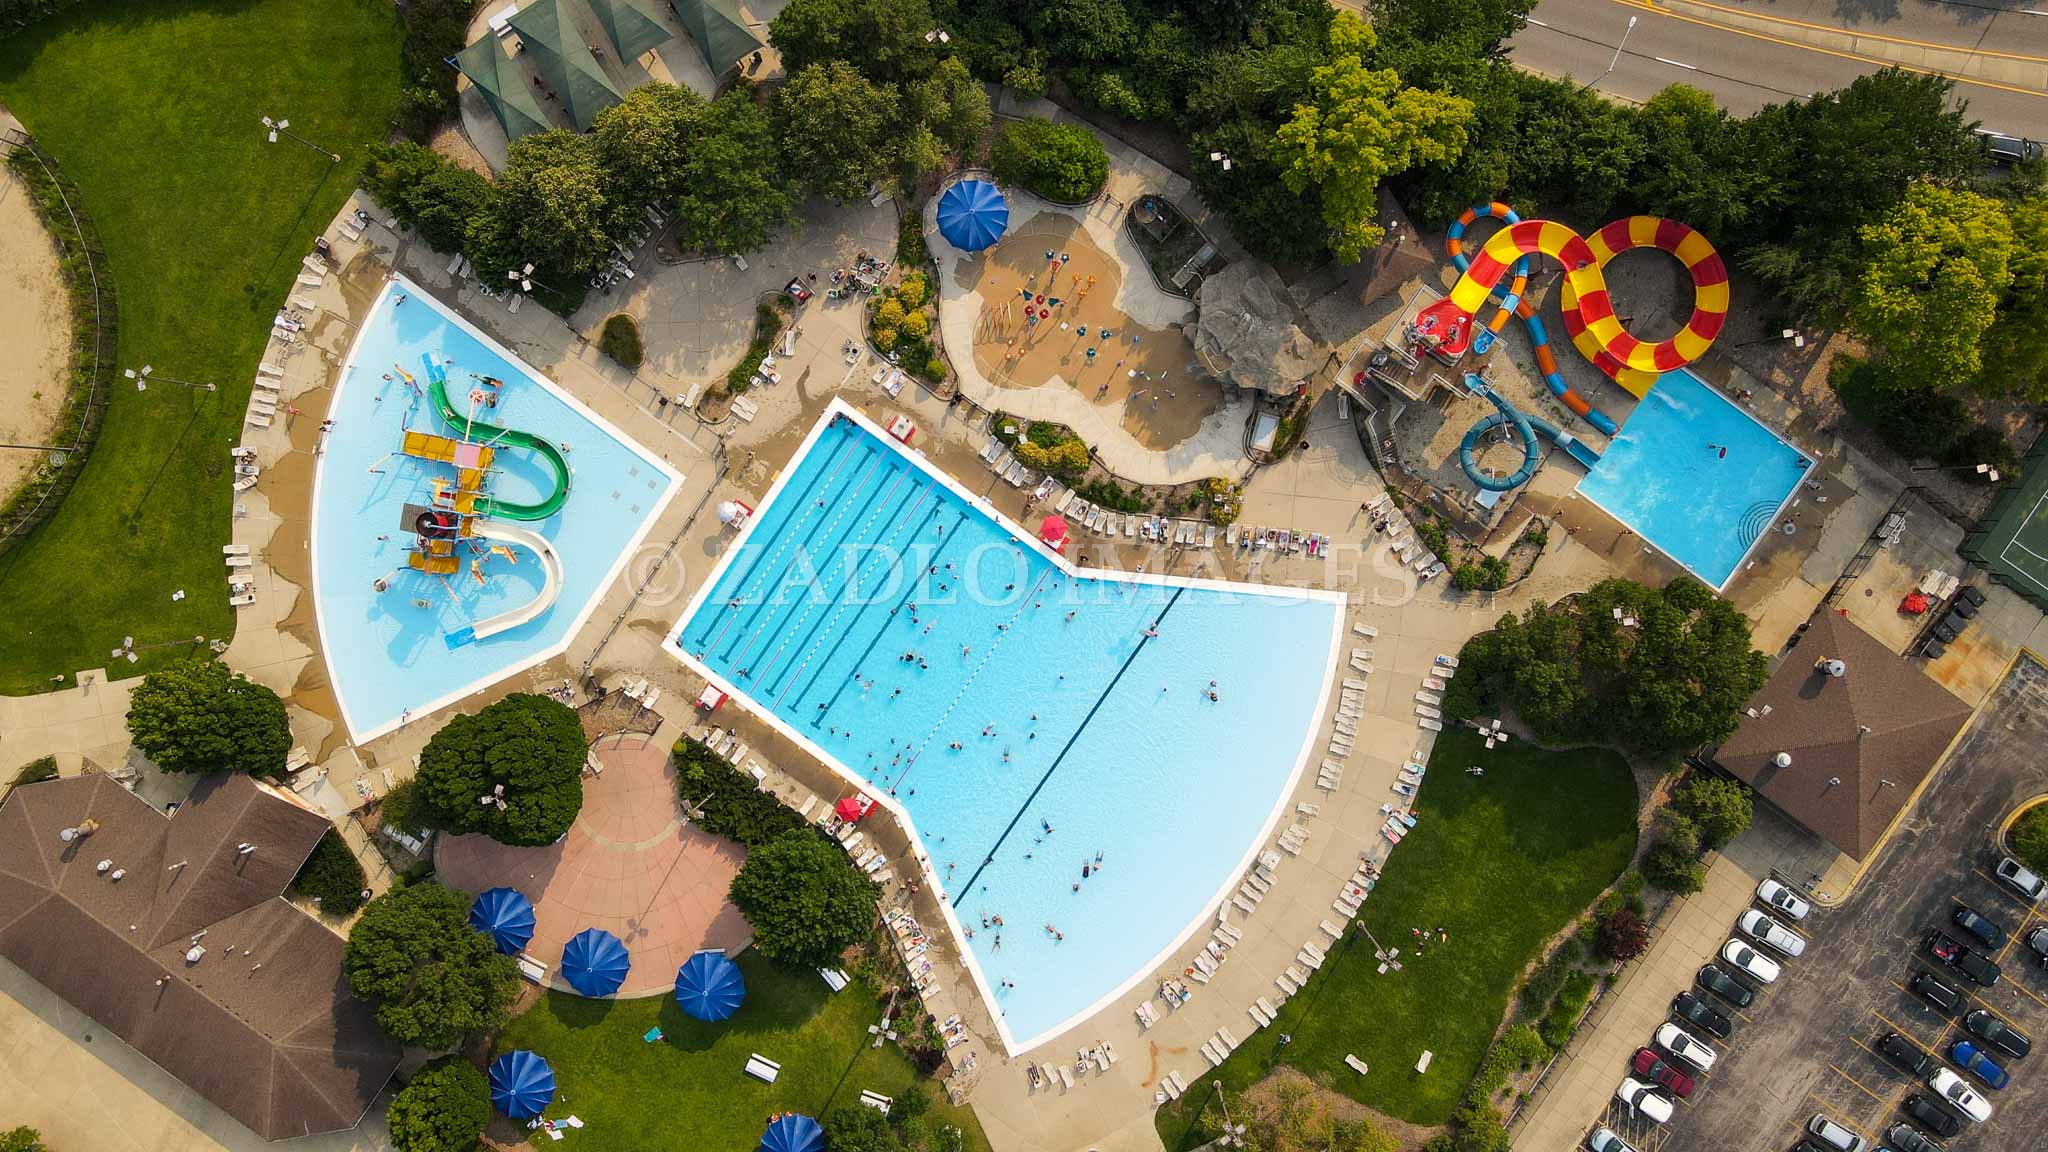 A waterpark with 3 pools.